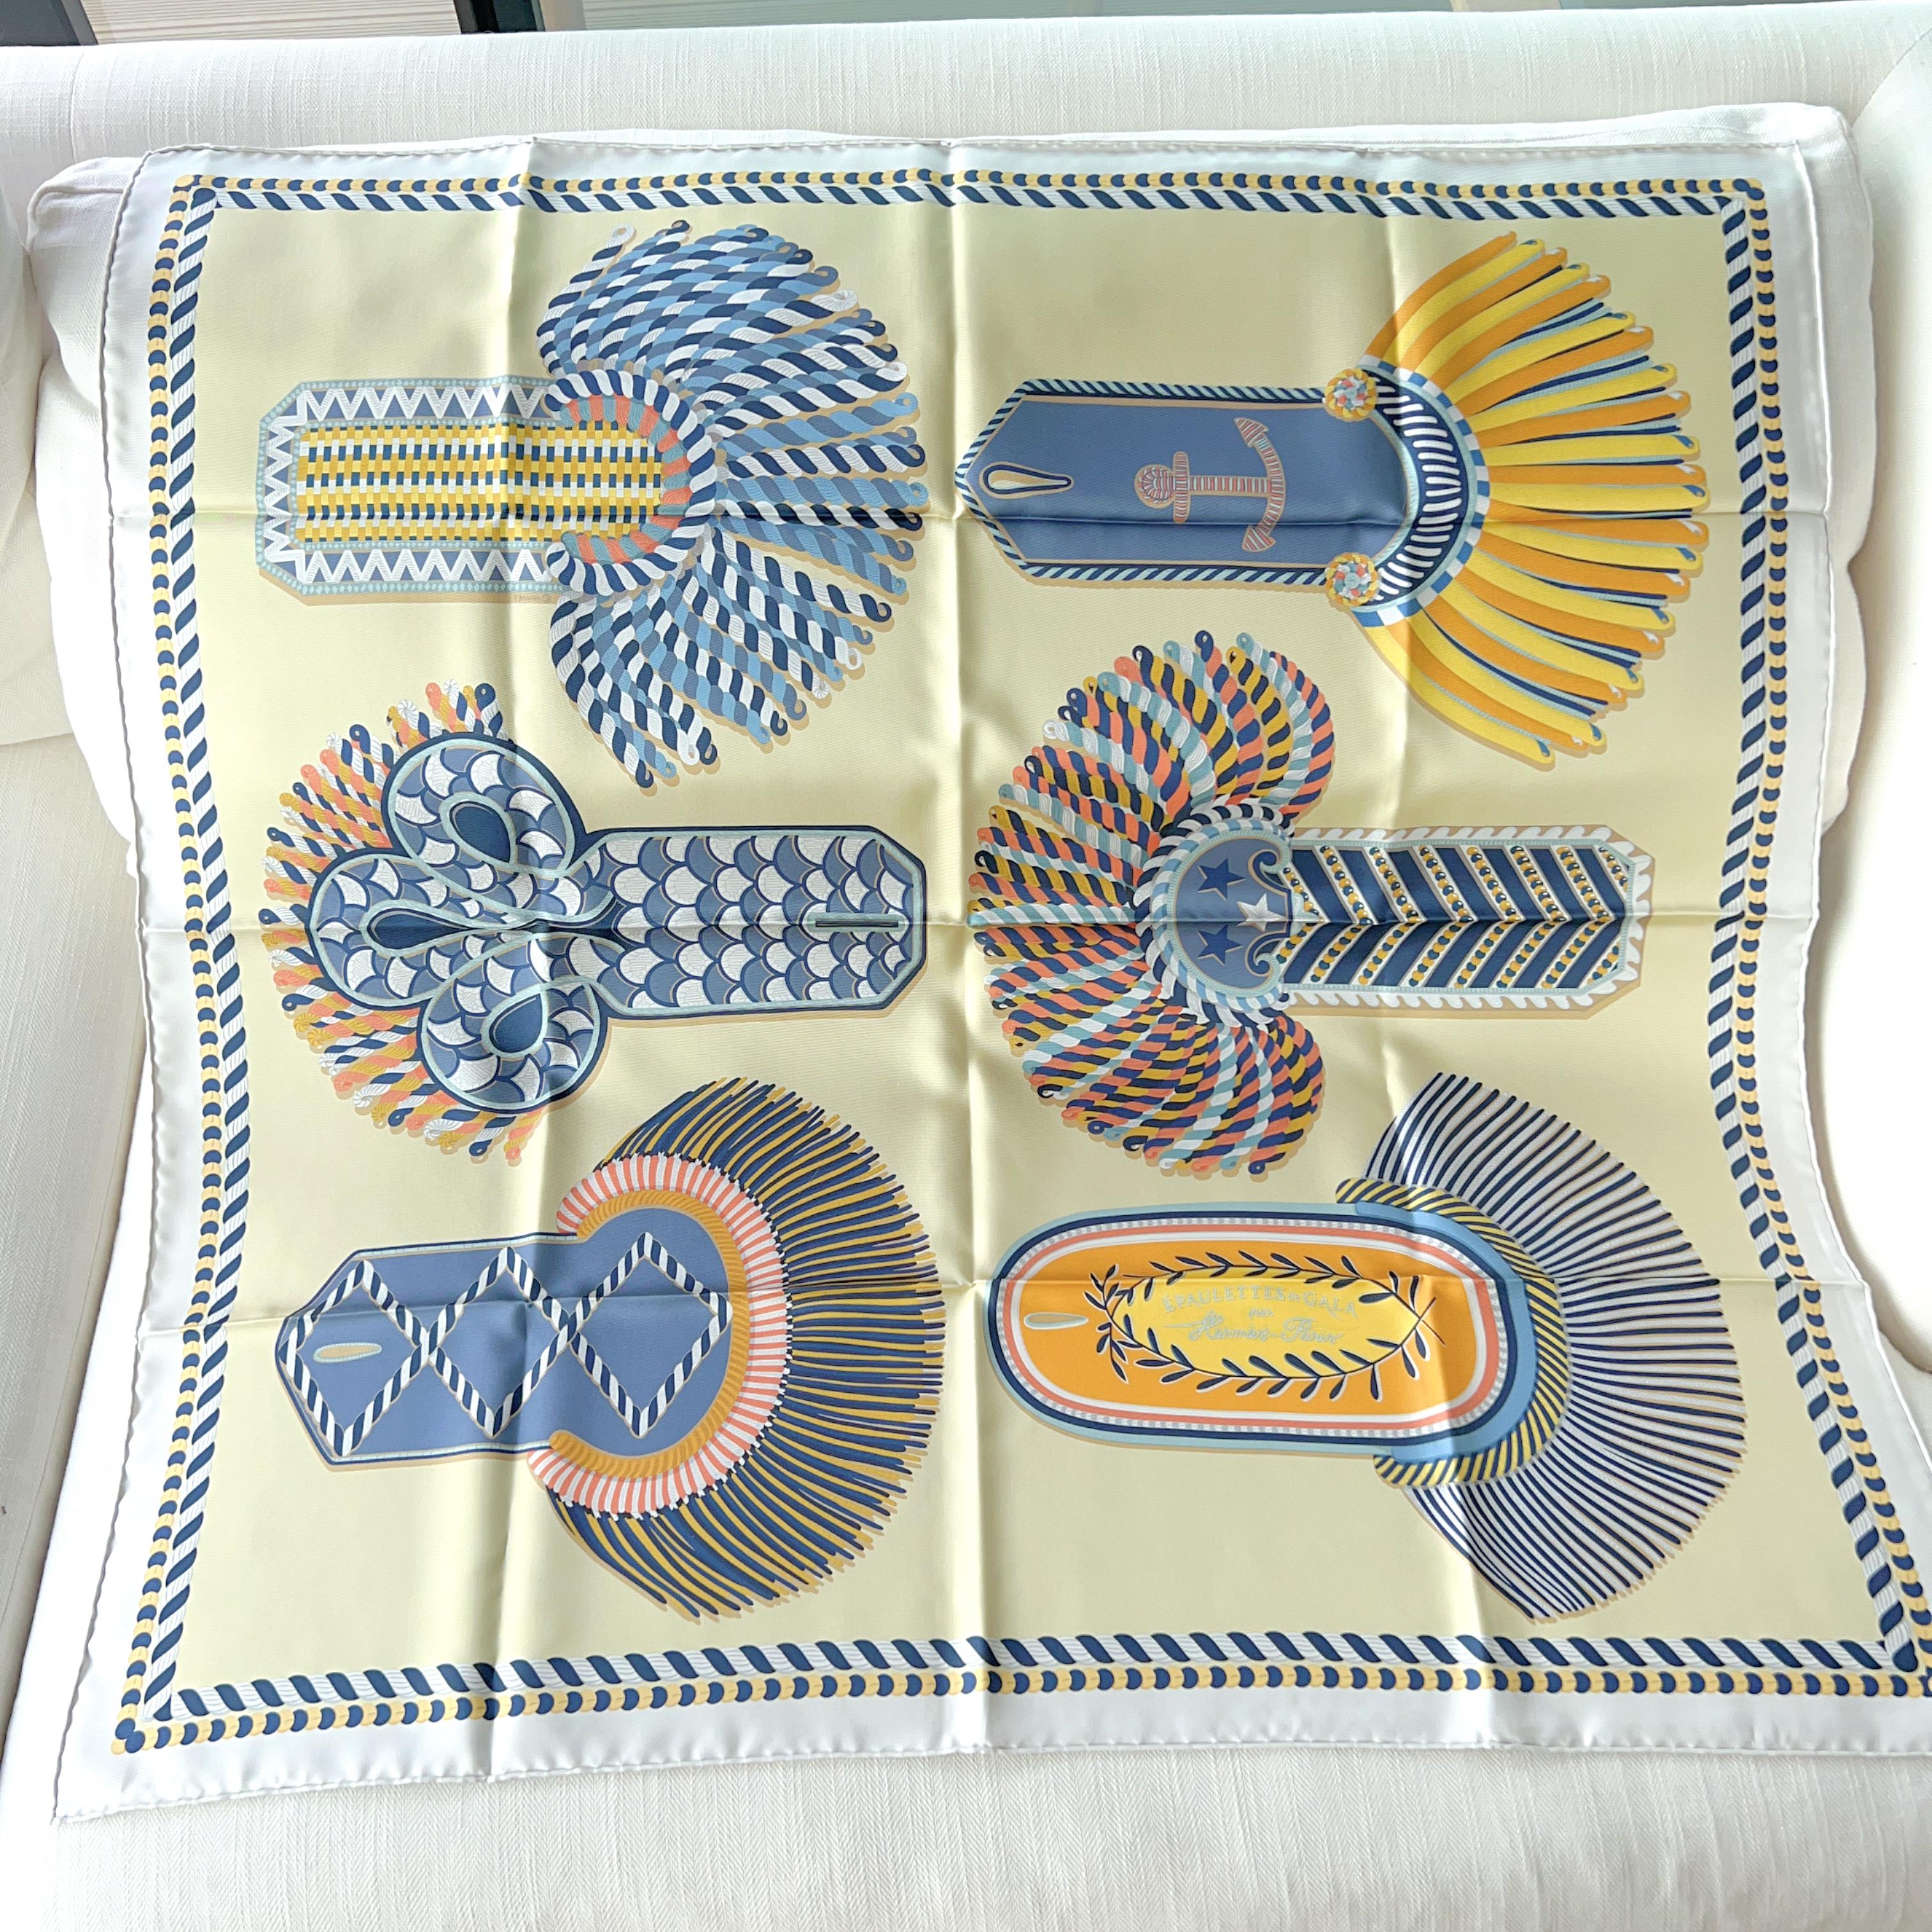 Shop this Hermes Epaulettes de Gala Double Face 90 in Gris Perle / Jaune Pâle / Gris Bleuté. This scarf design is the first that is printed on both sides allowing you to change sides for a new style. The design depicts epaulettes that you see on the